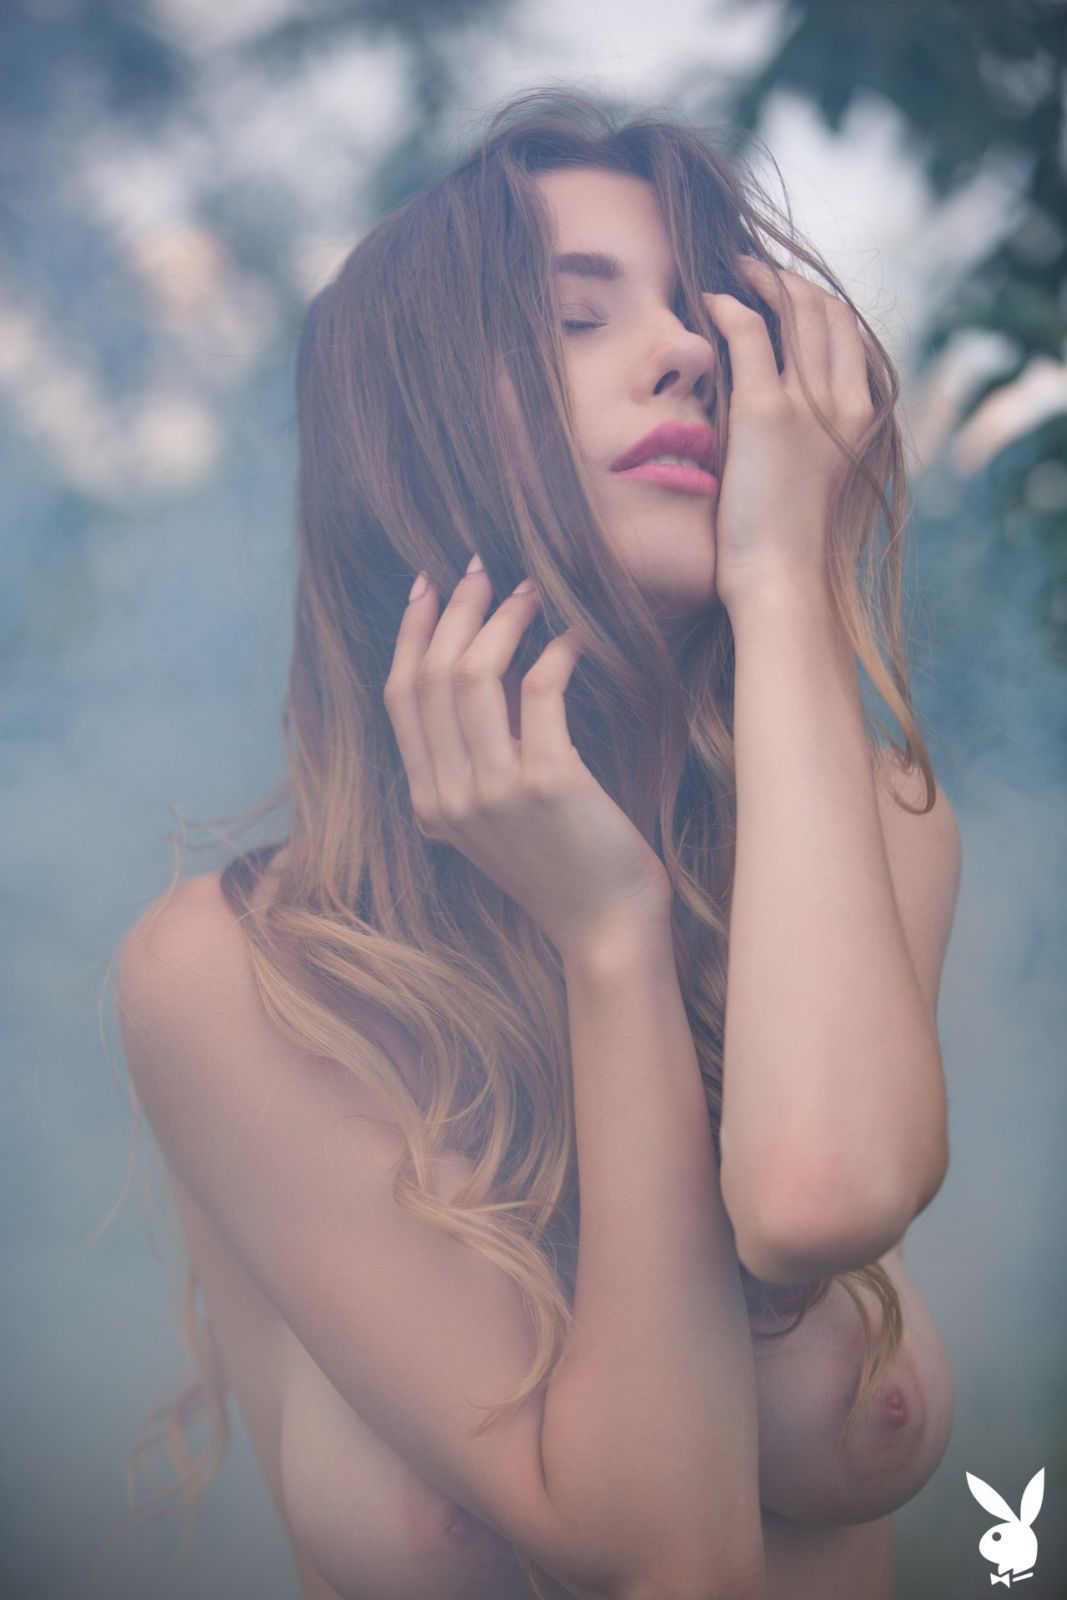 Mila Azul Stripping Nude Outdoor While Surrounded By Smoke